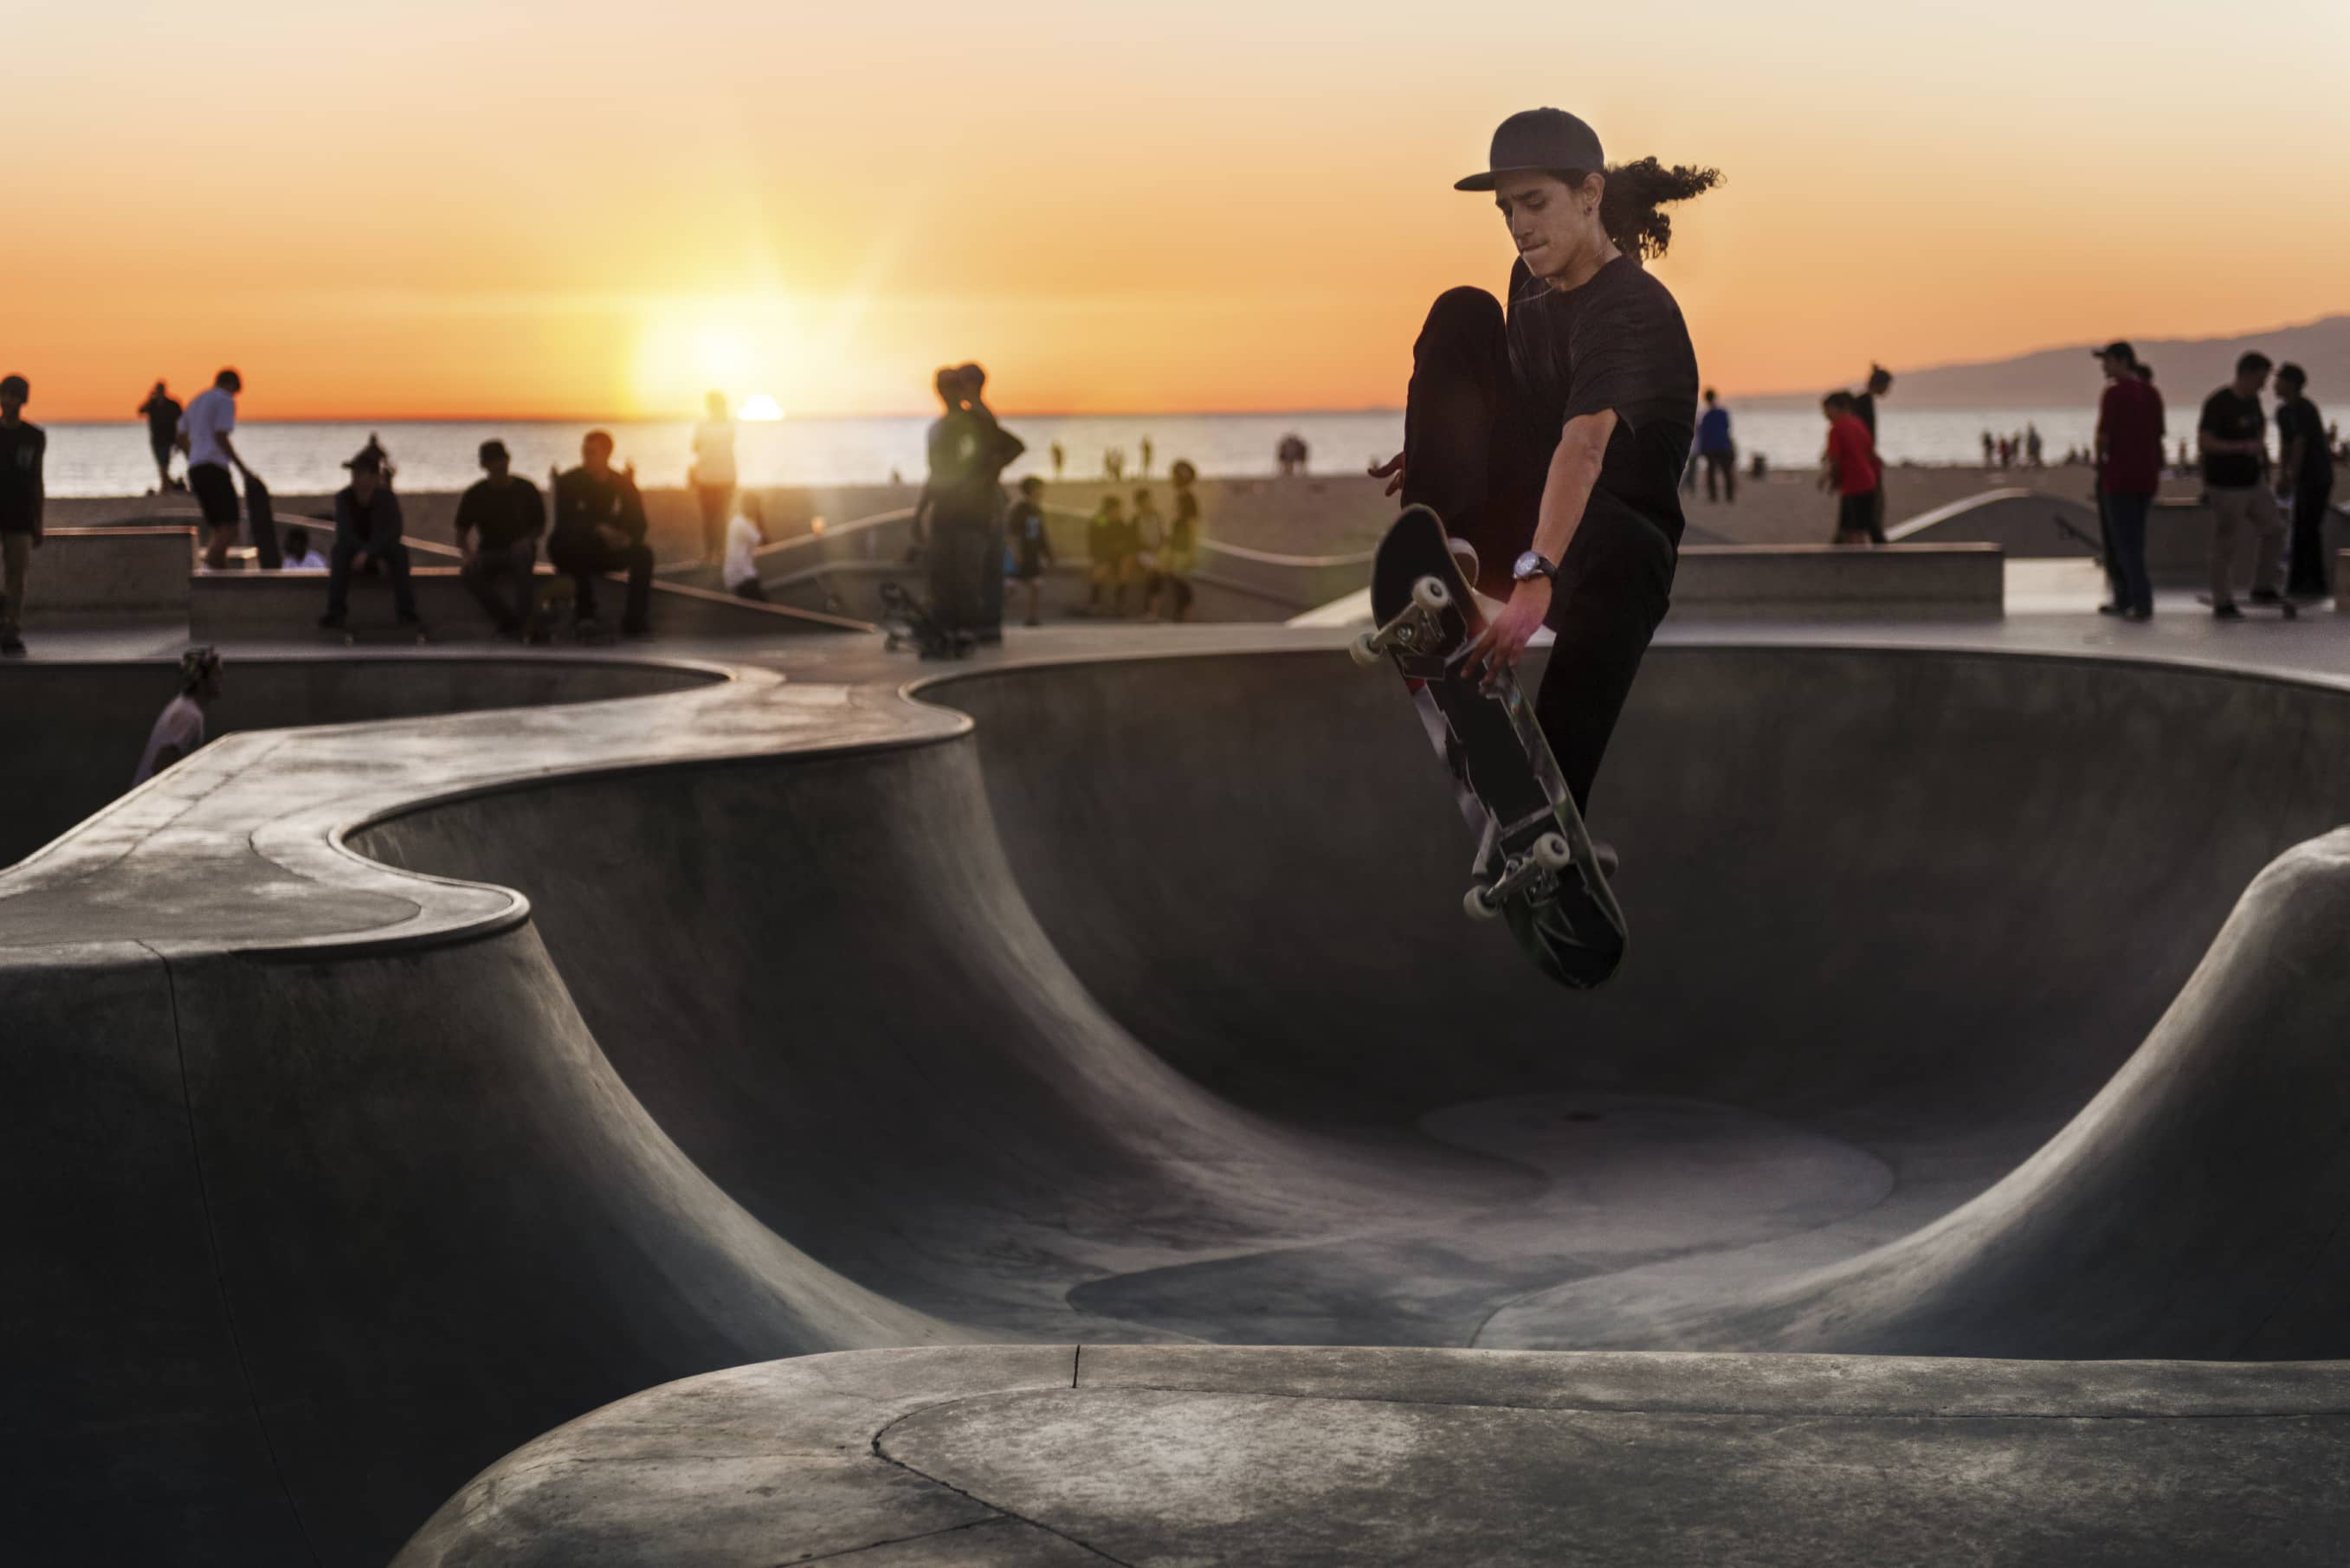 Man skateboarding at sunset motivated by intrinsic motivation and passion.